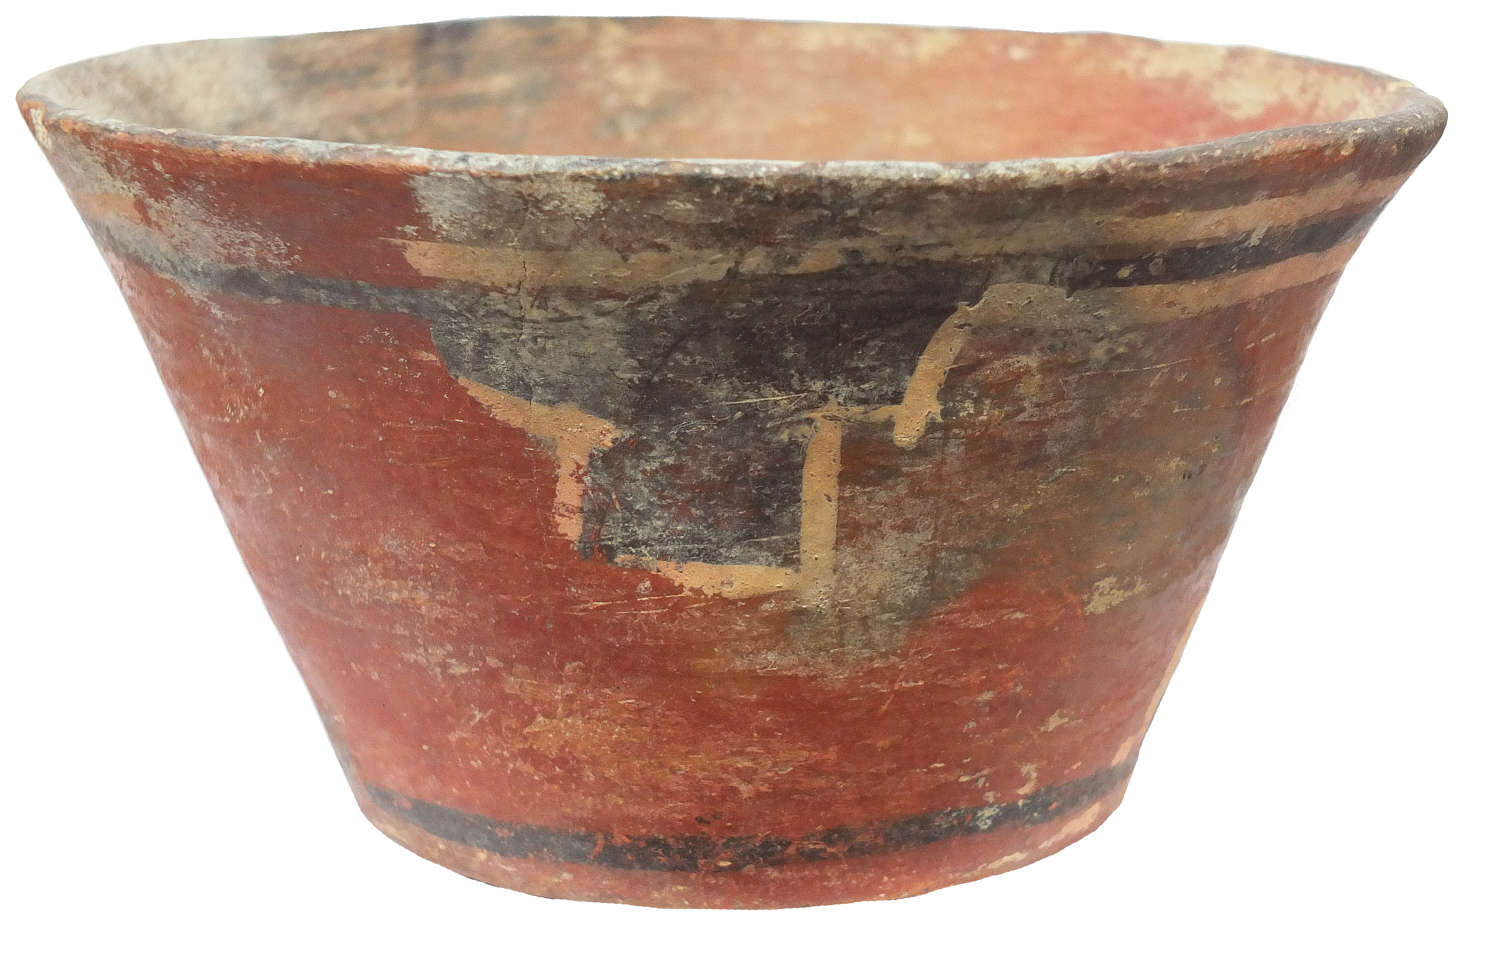 A good-sized Bolivian pottery bowl, c. 200-700 A.D.